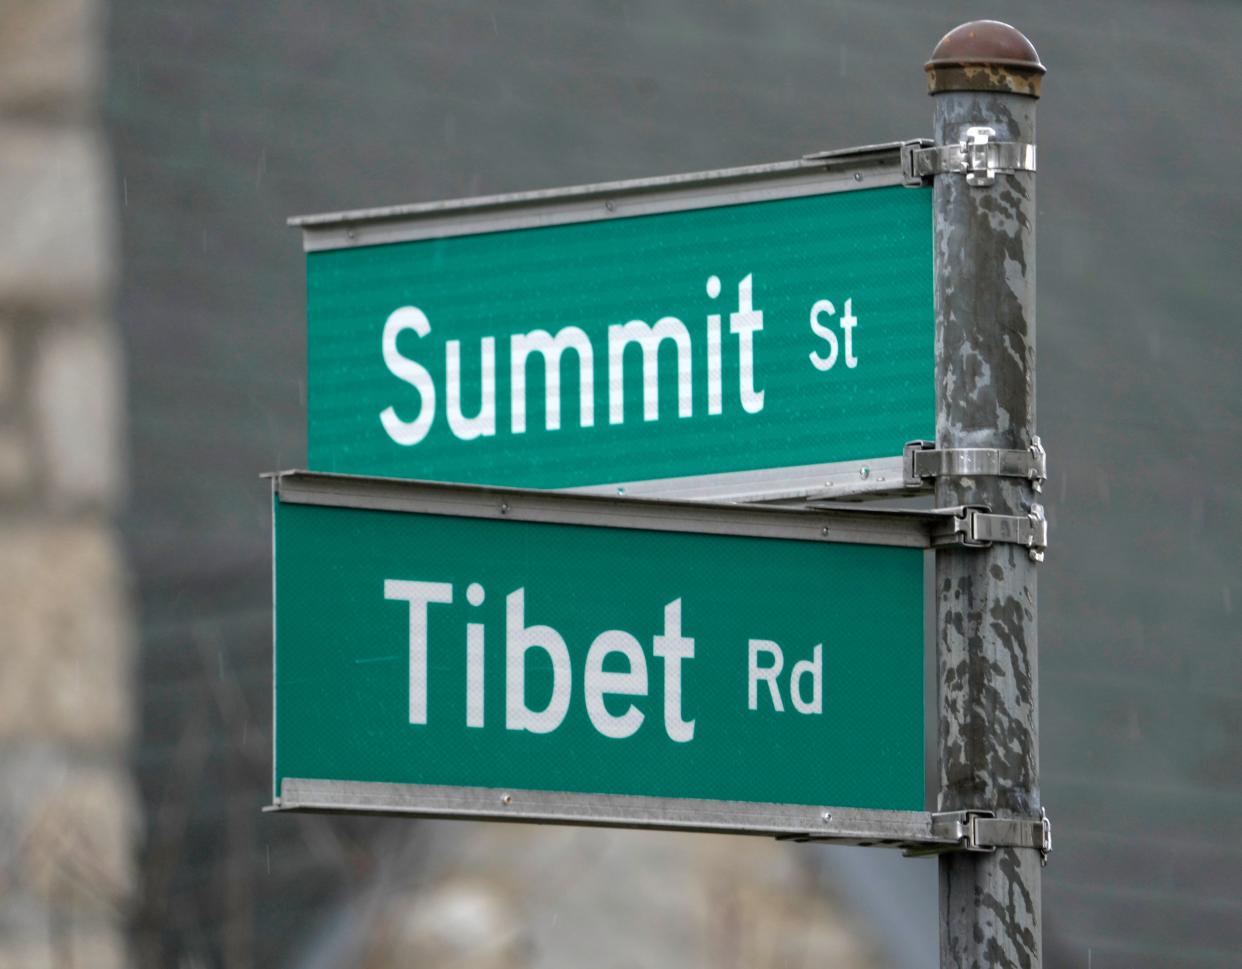 Visitors can “travel the world in Ohio” by visiting towns named after foreign metropolises like Athens, Berlin, Medina, Dublin, or Lima (all localized with Ohioans' unique pronunciations, of course). This sign for the intersection of Summit Street and Tibet Road is in Clintonville.